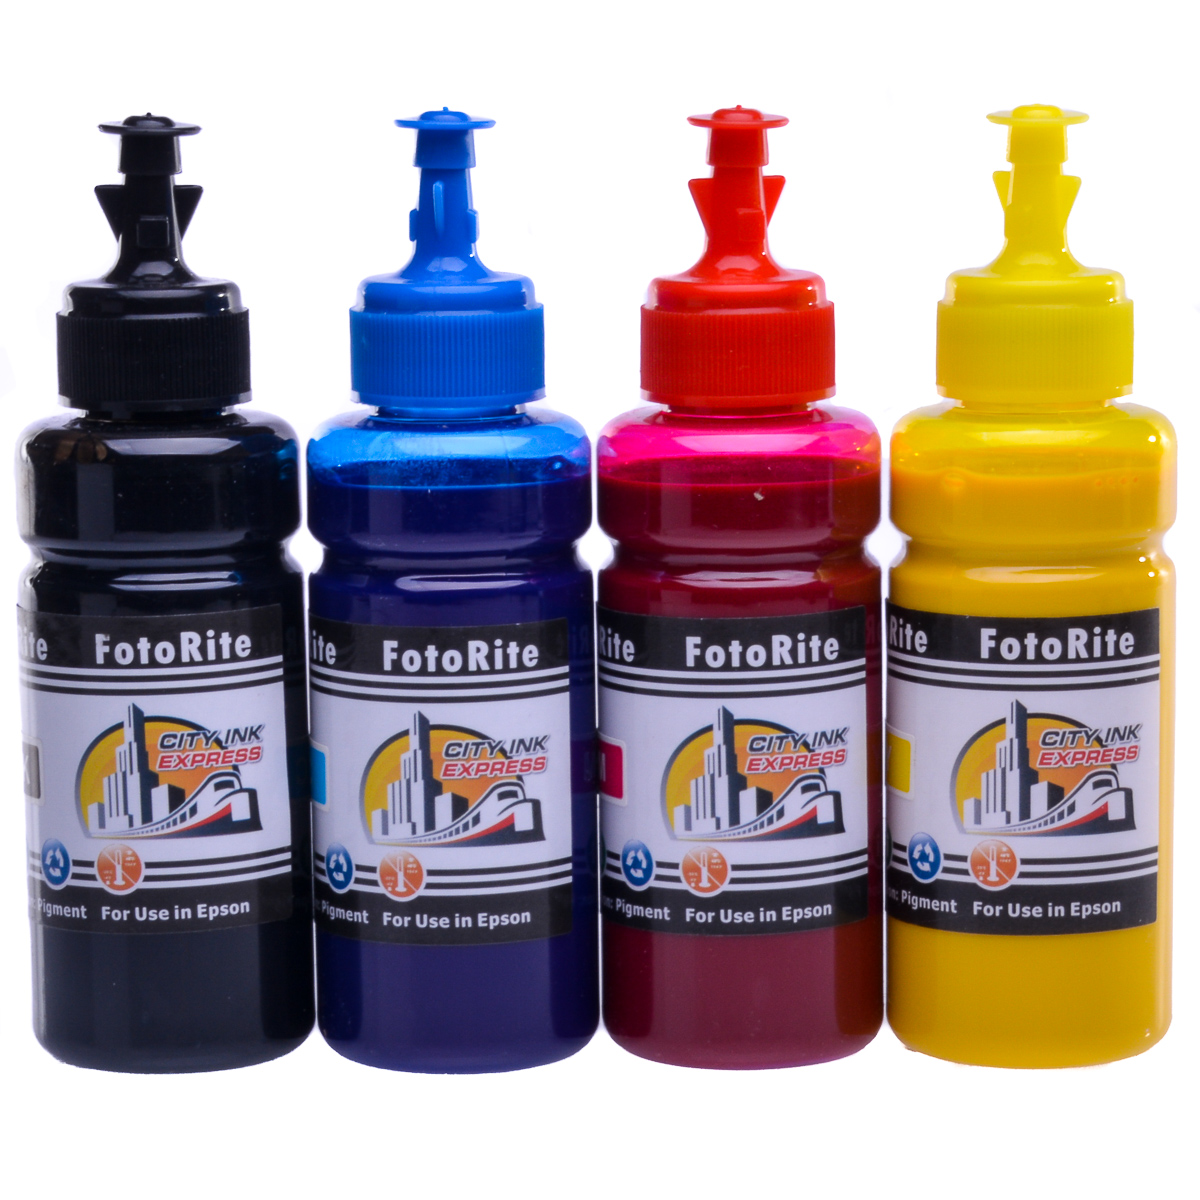 Cheap Multipack pigment ink refill replaces Epson XP-3100